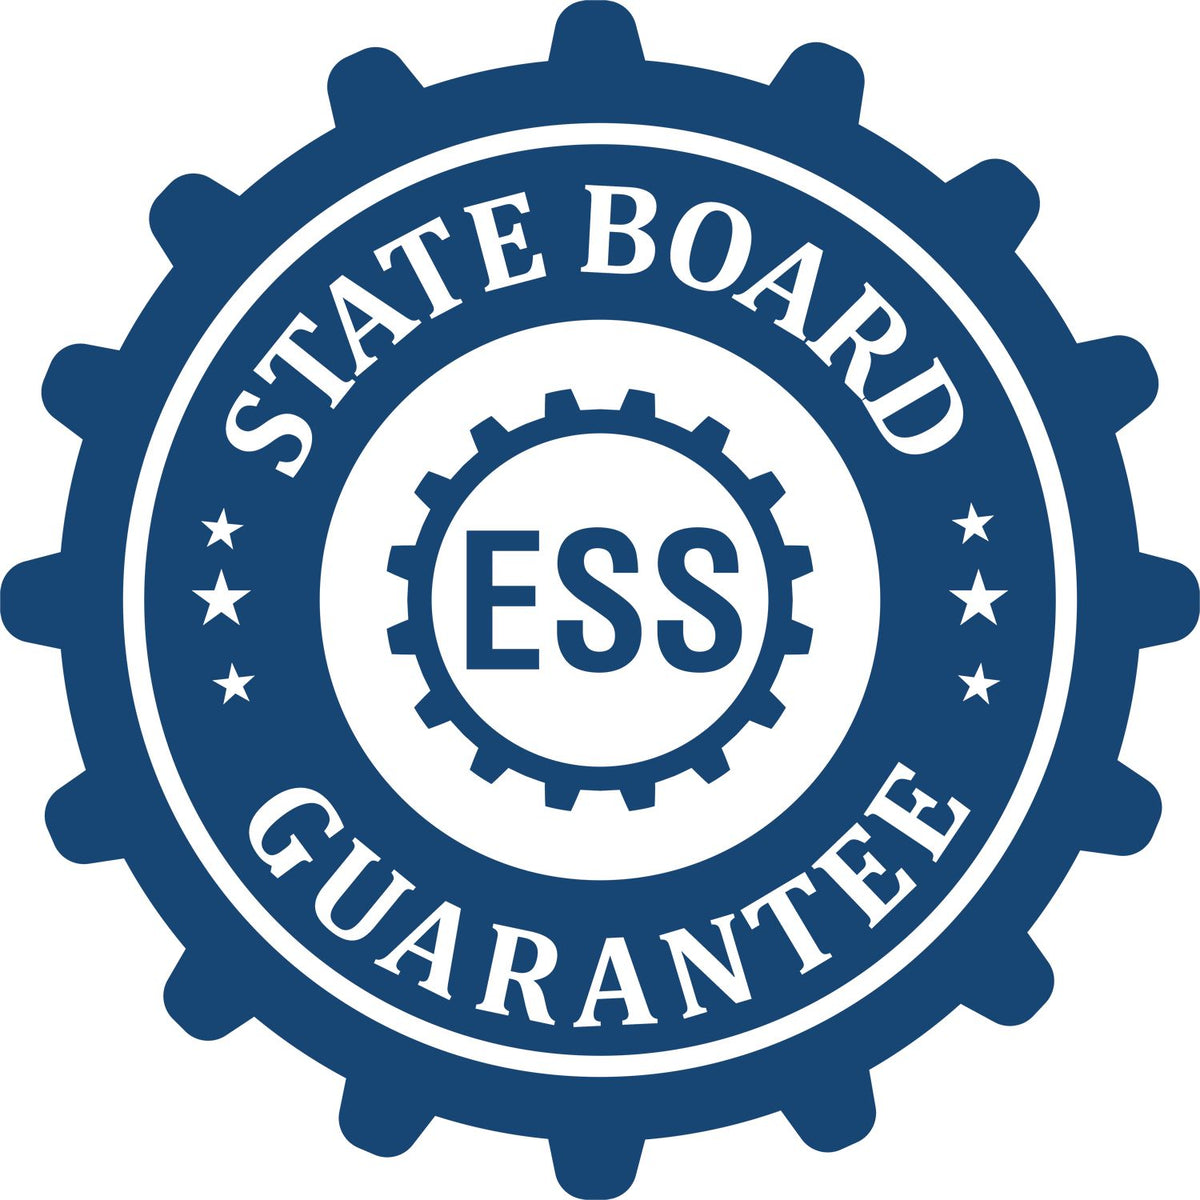 An emblem in a gear shape illustrating a state board guarantee for the Hybrid Oklahoma Landscape Architect Seal